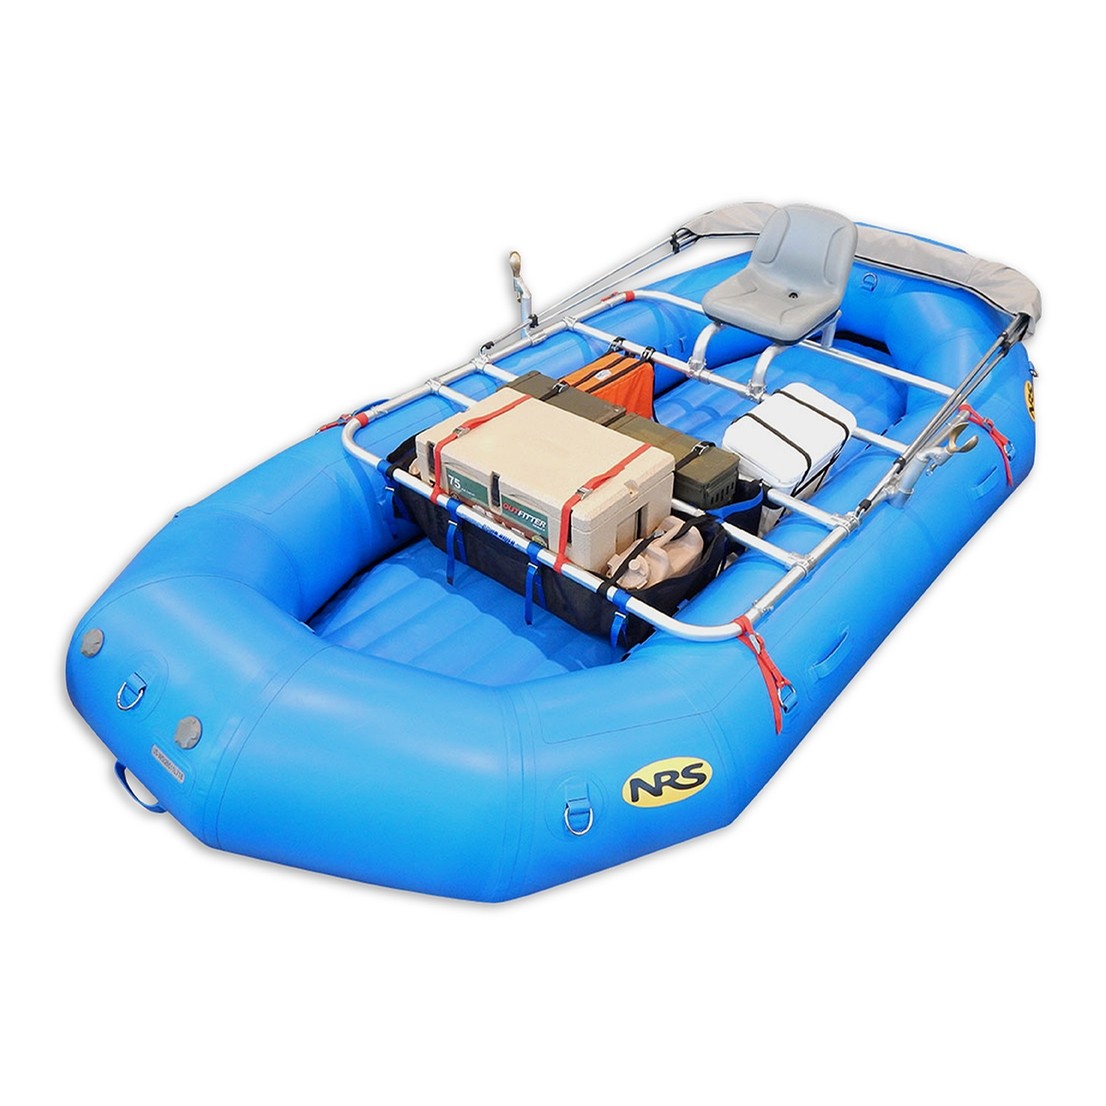 https://www.companybe.com/DownRiverEquipment/product_photos/rd_images/rd_Down-River-Equipment-4-Bay-Gunnison-Frame-with-Gear-and-Bimini4.jpg